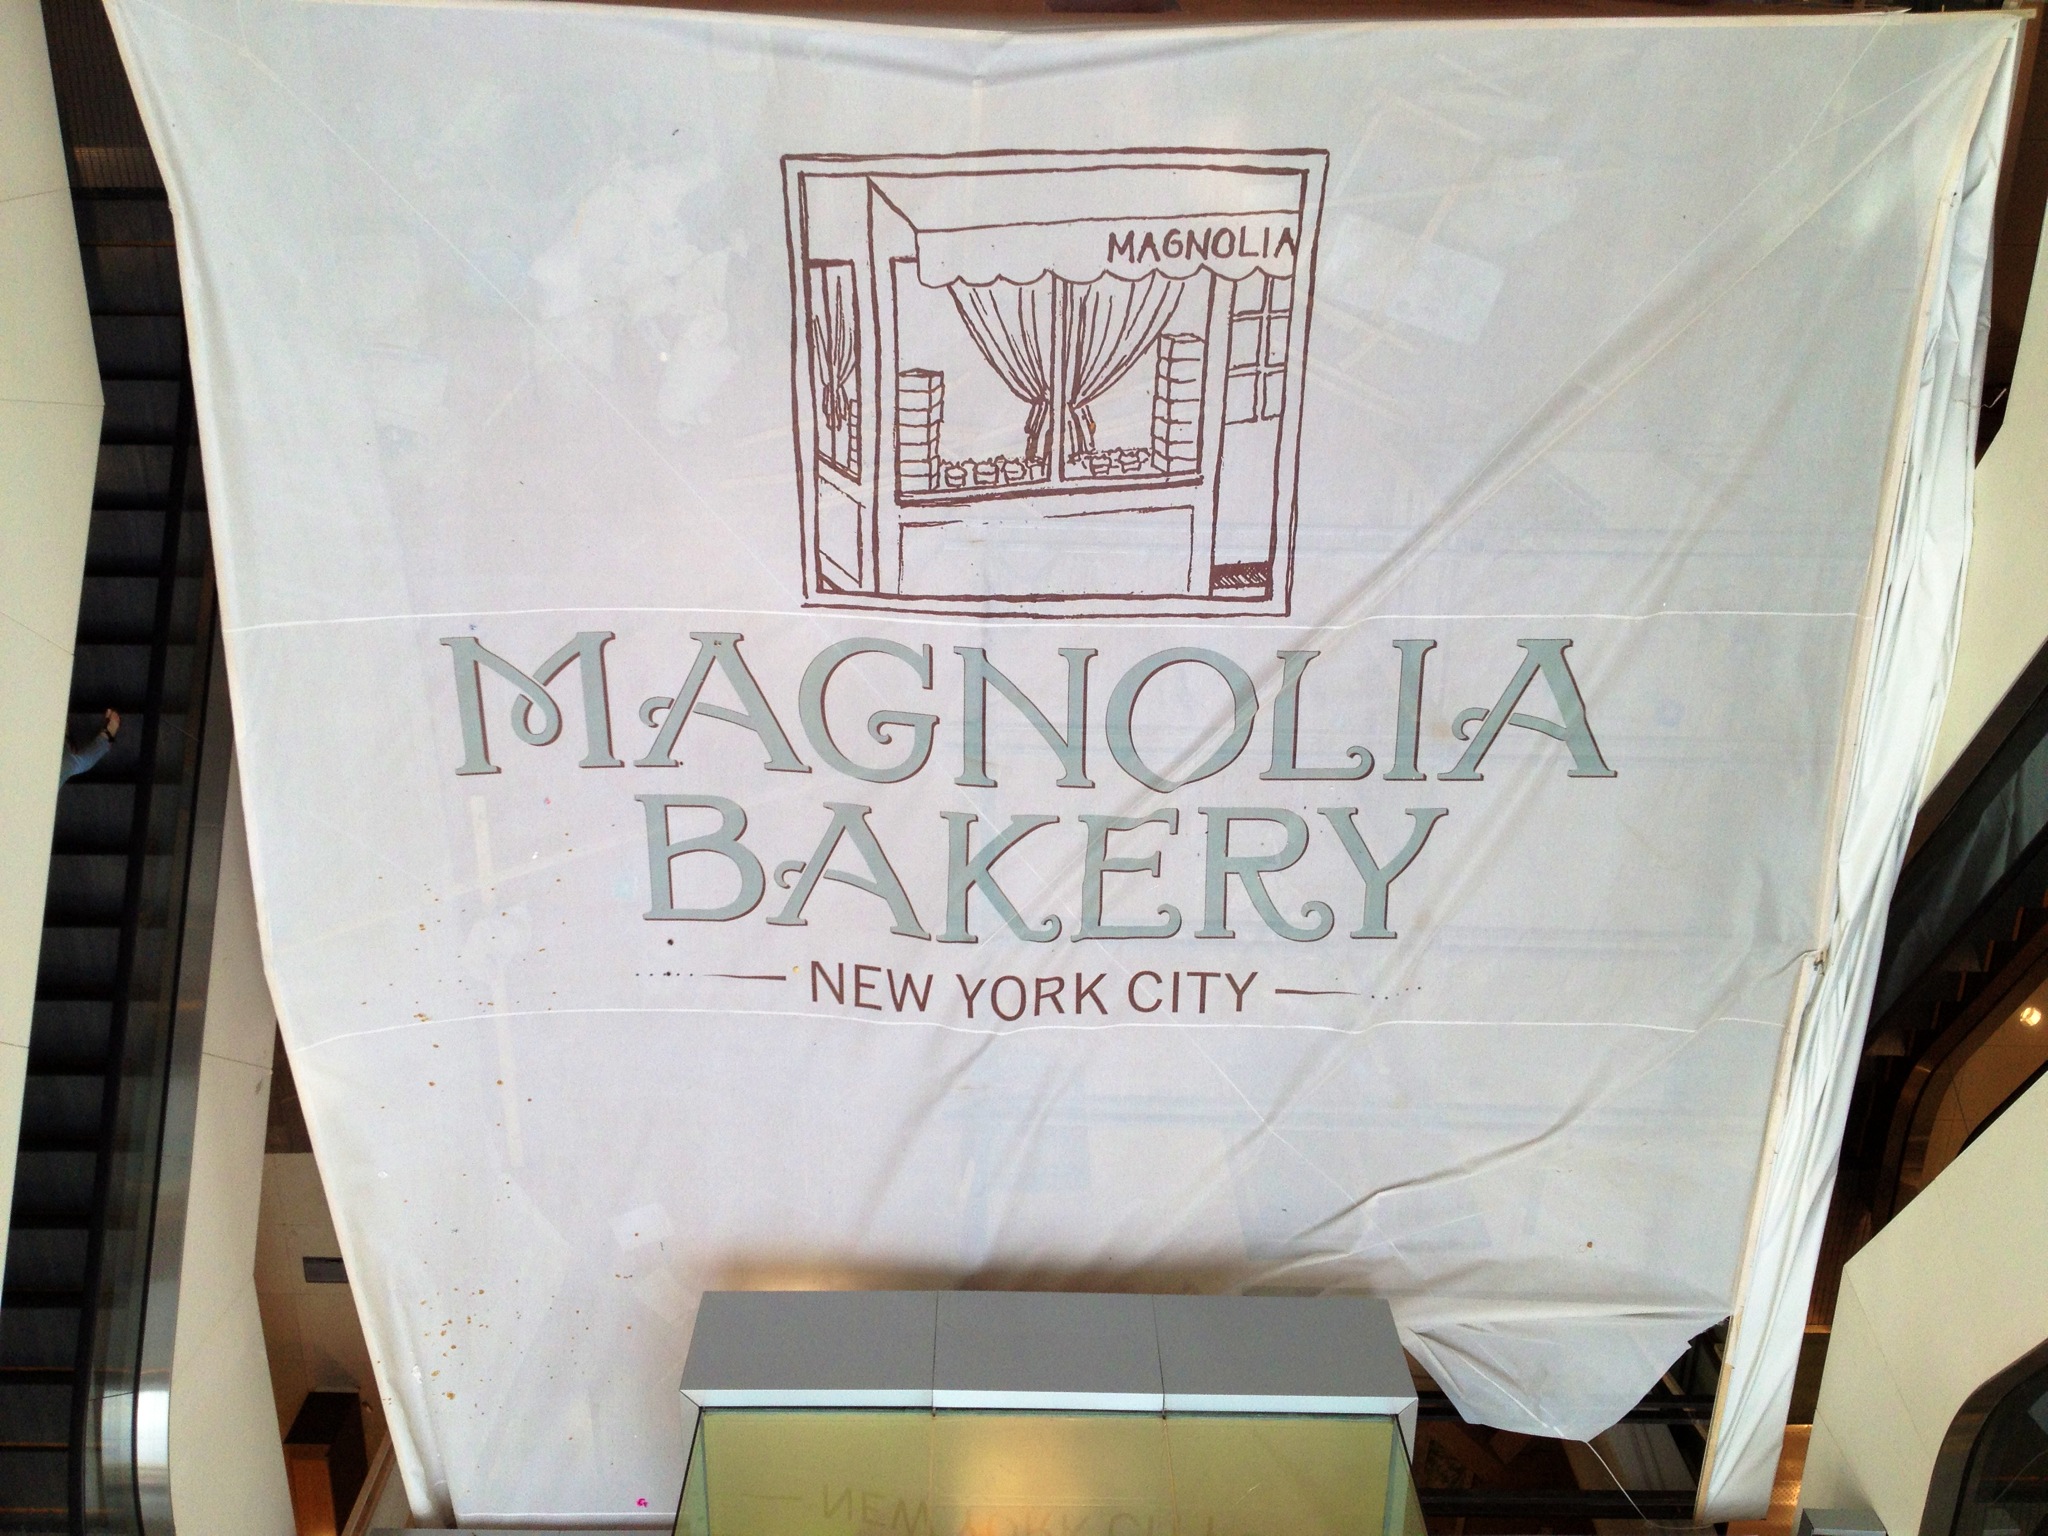 Magnolia Bakery Travels Globally One Stop Will Be Lebanon Restaurant Closed